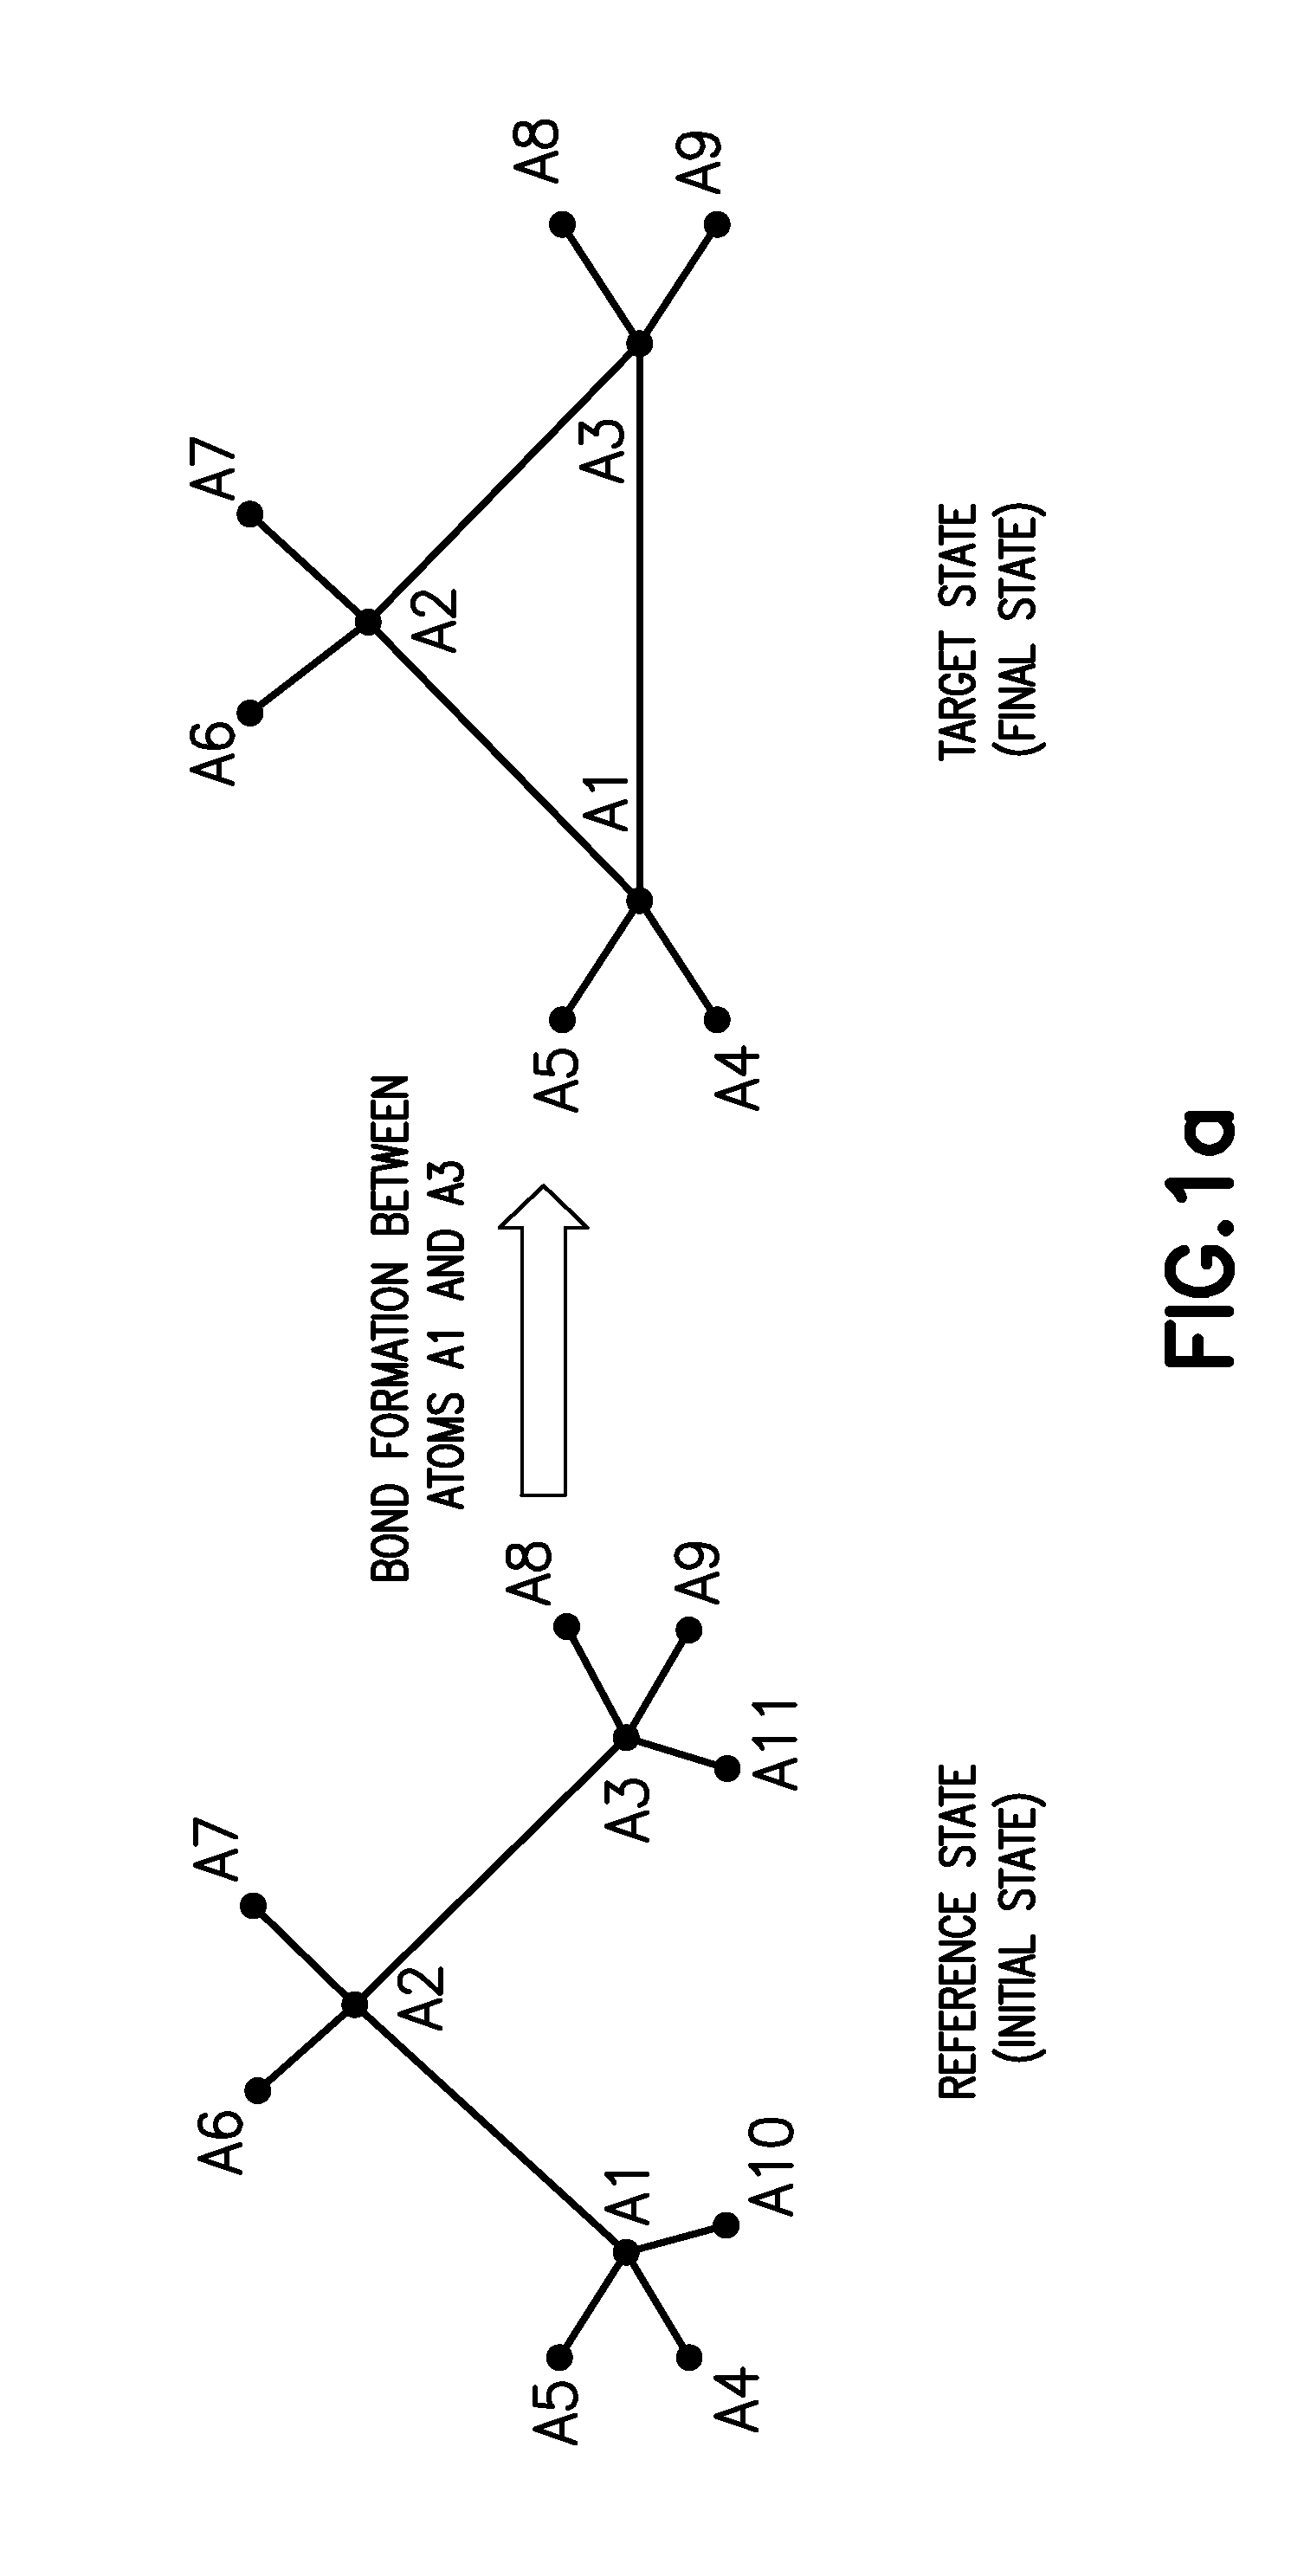 Methods and systems for calculating free energy differences using a modified bond stretch potential